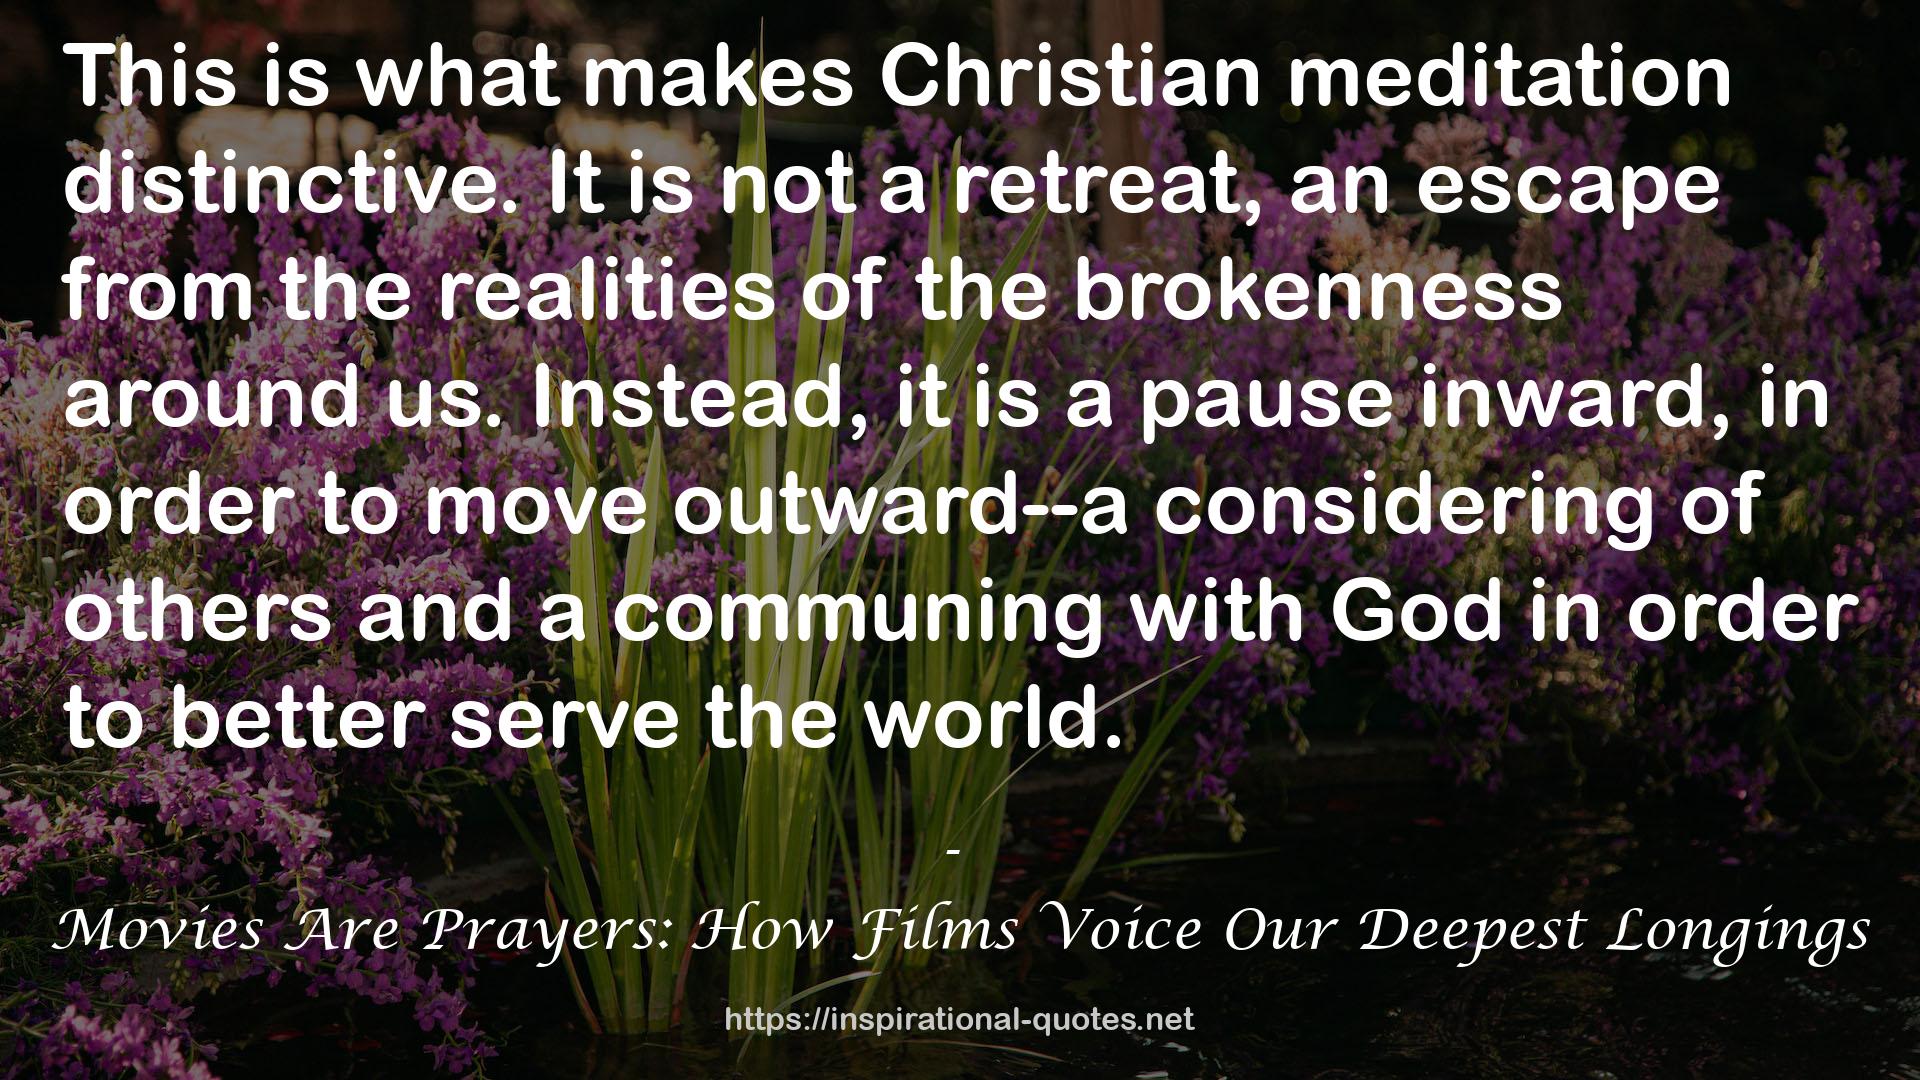 Movies Are Prayers: How Films Voice Our Deepest Longings QUOTES